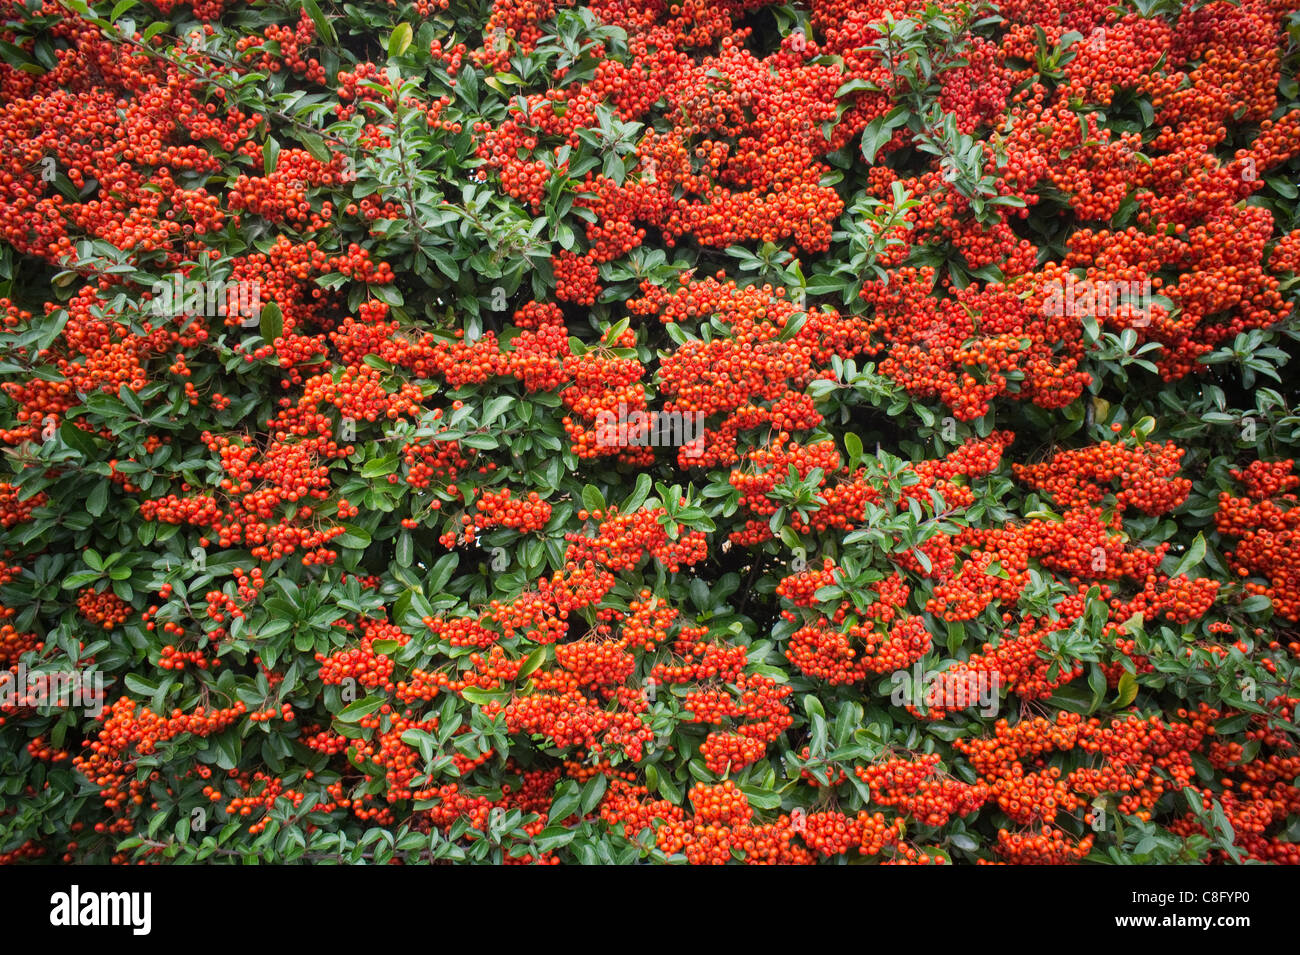 Orange red berries in October of the Pyracantha or Firethorn shrub Stock Photo